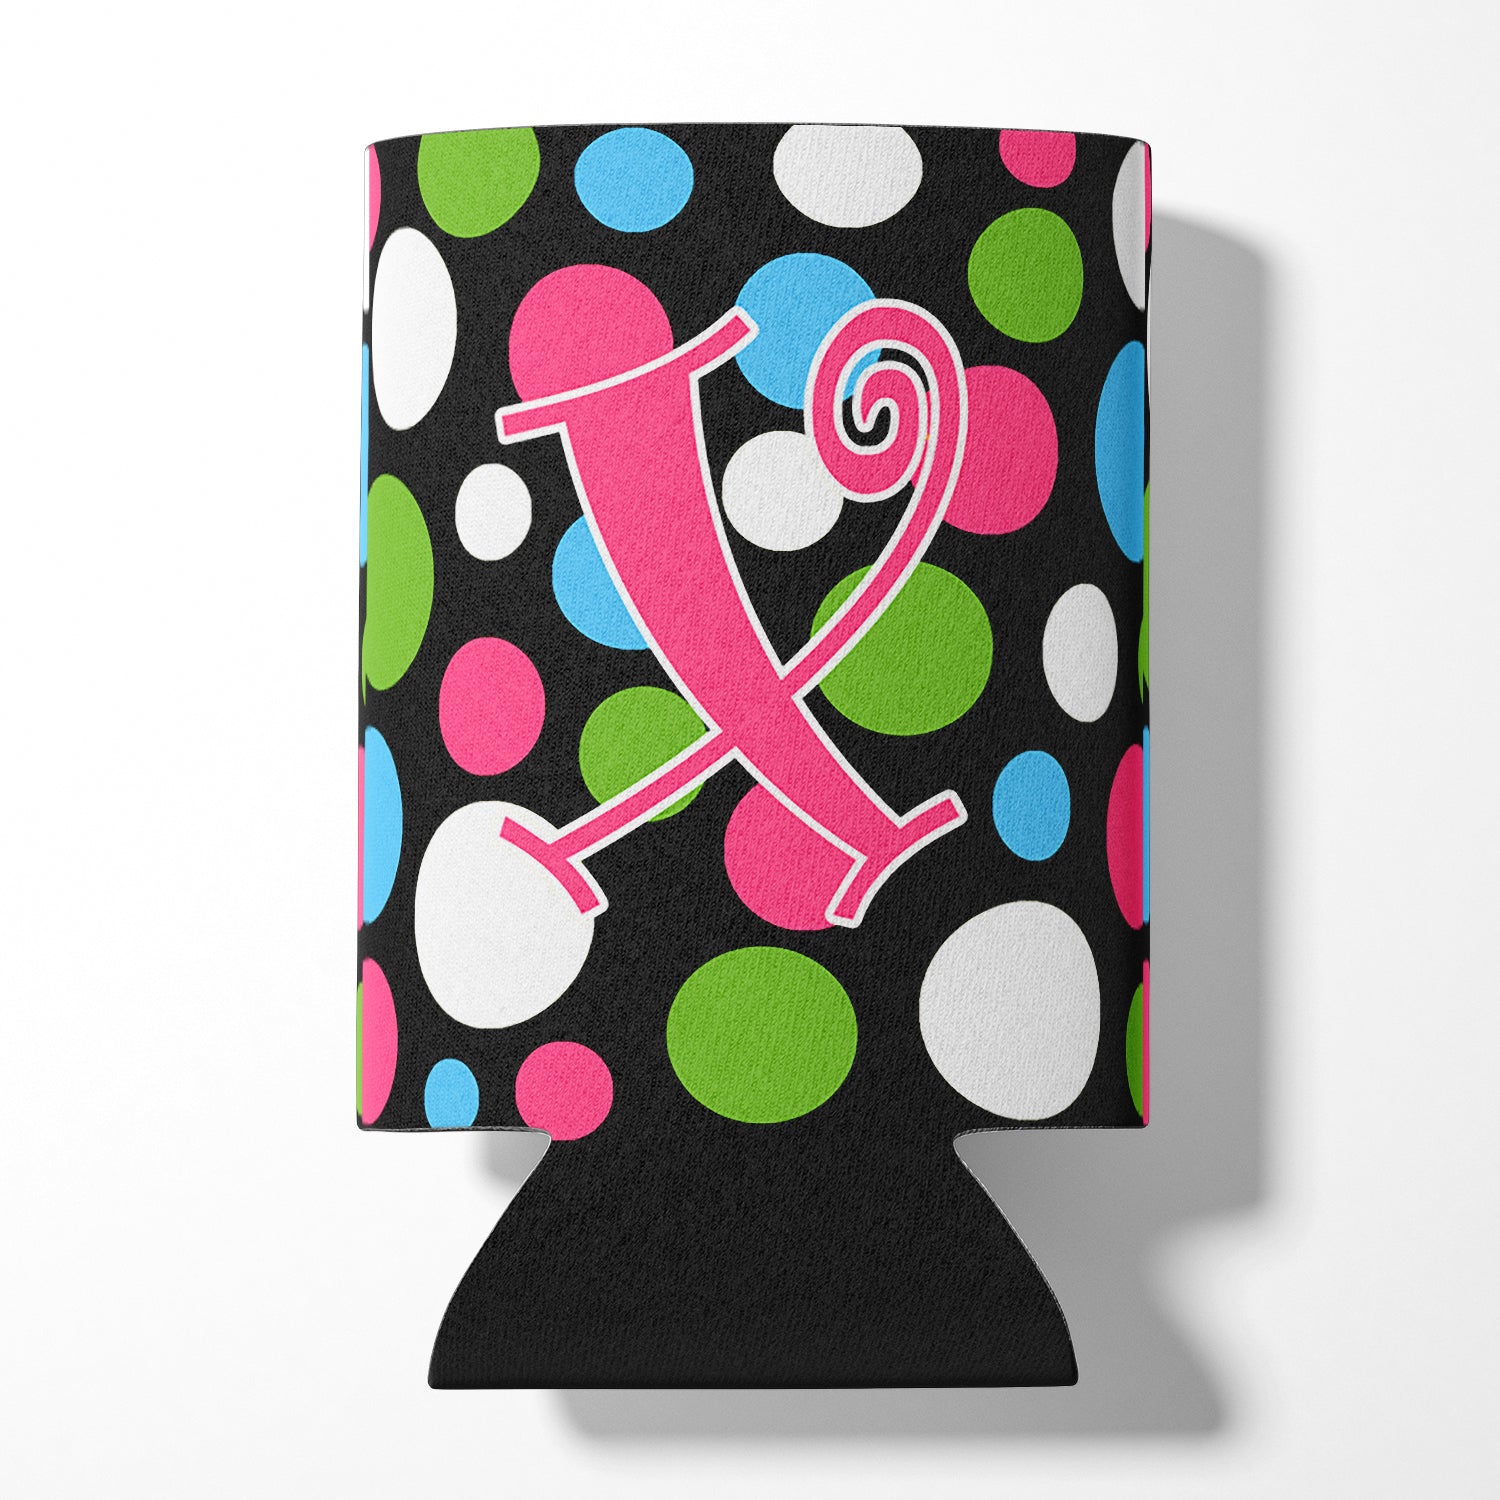 Letter X Initial Monogram - Polkadots and Pink Can or Bottle Beverage Insulator Hugger